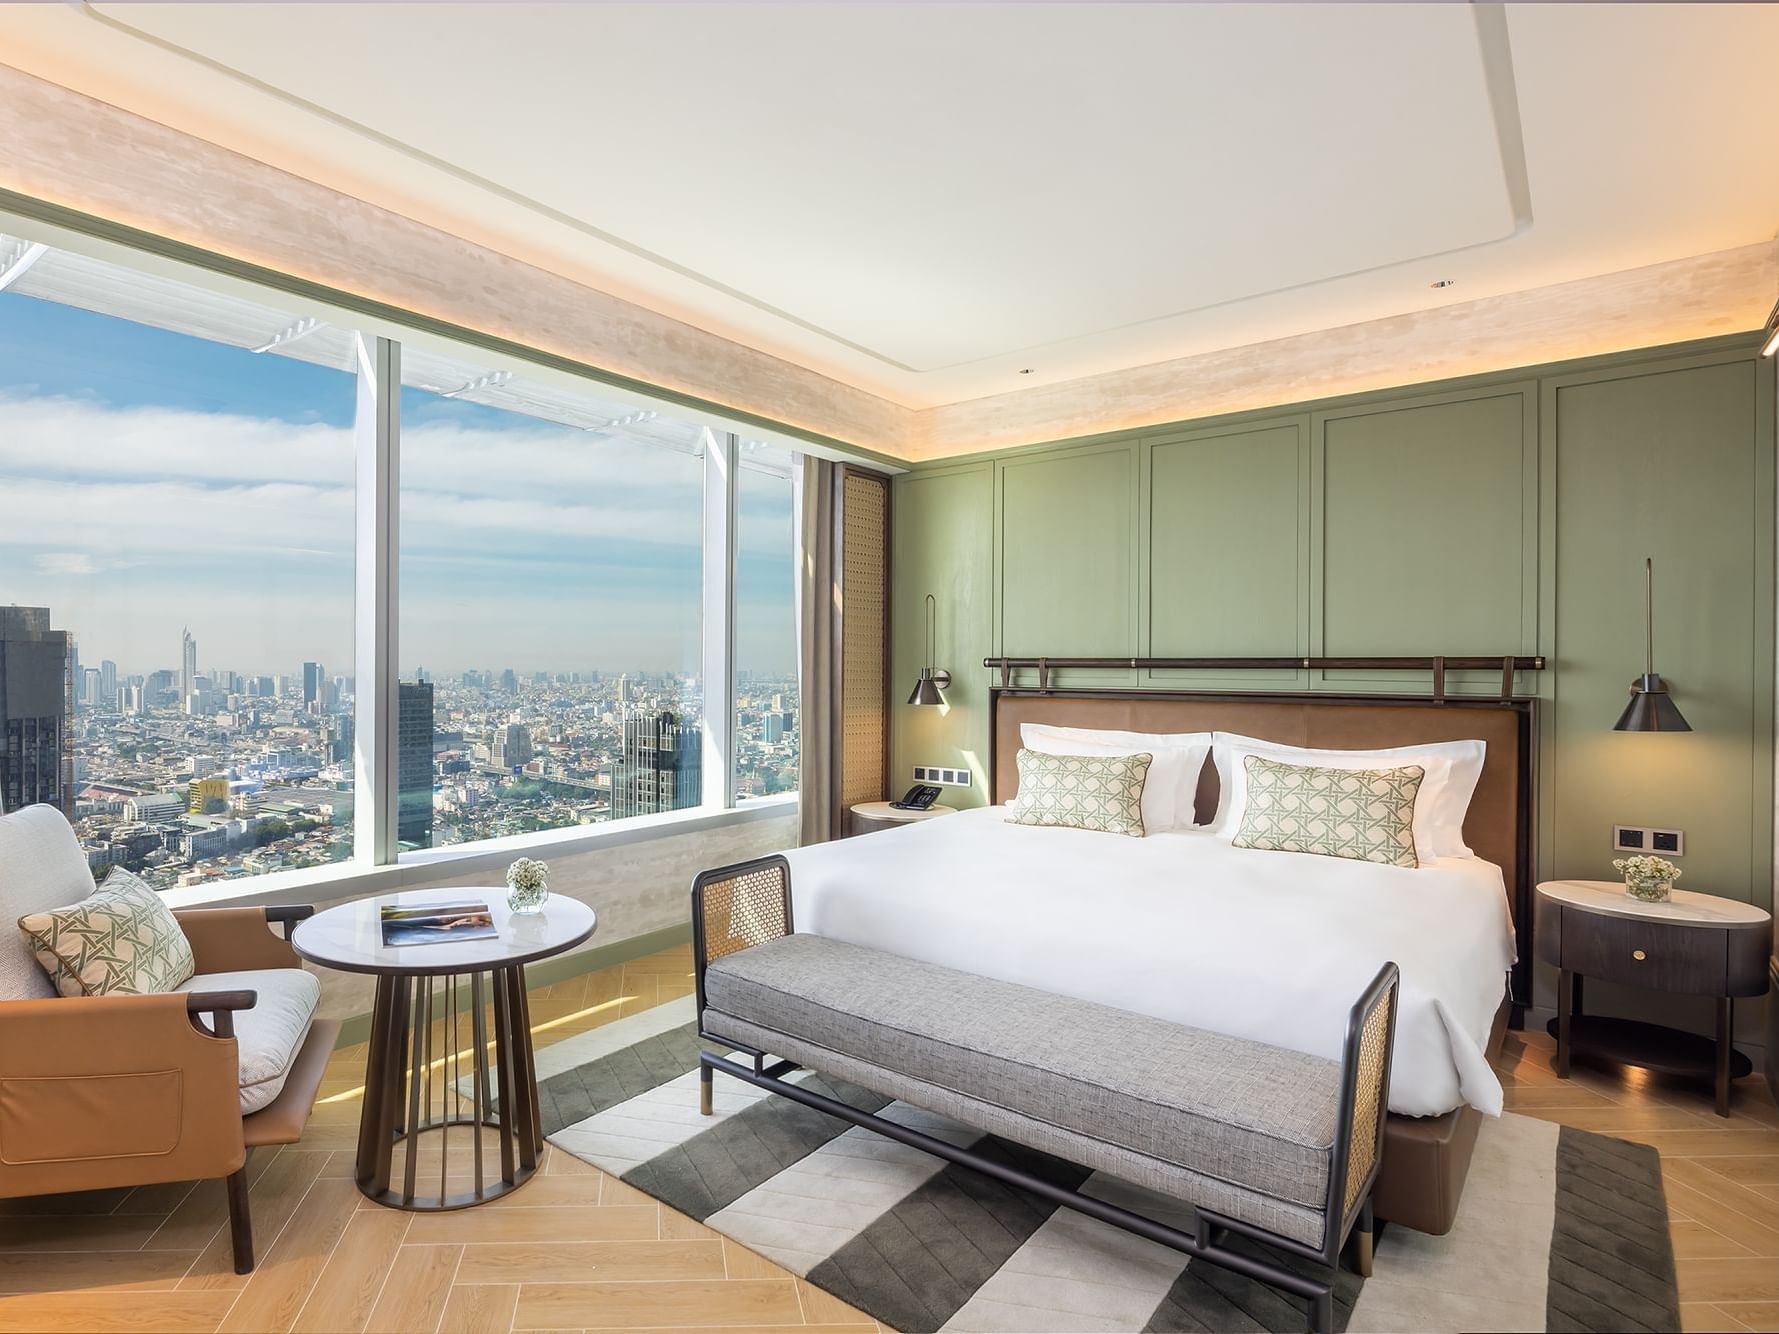 1-Bedroom Suite with city view at Eastin Grand Hotel Phayathai